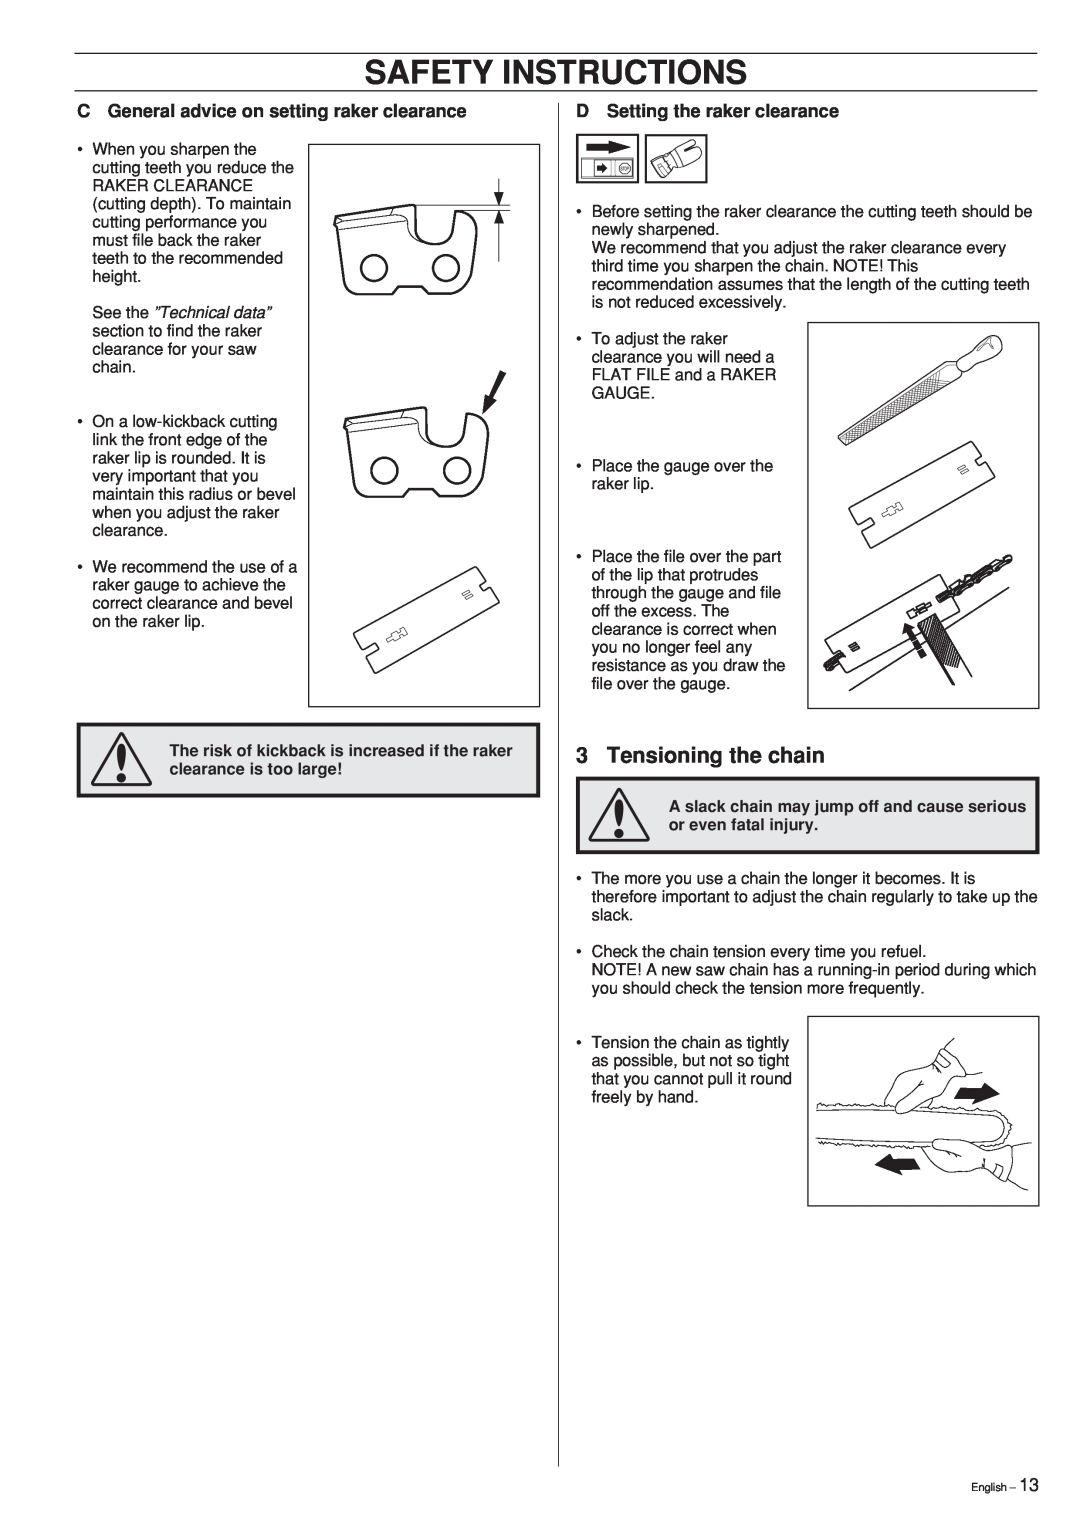 Husqvarna 55 manual Safety Instructions, Tensioning the chain, C General advice on setting raker clearance 